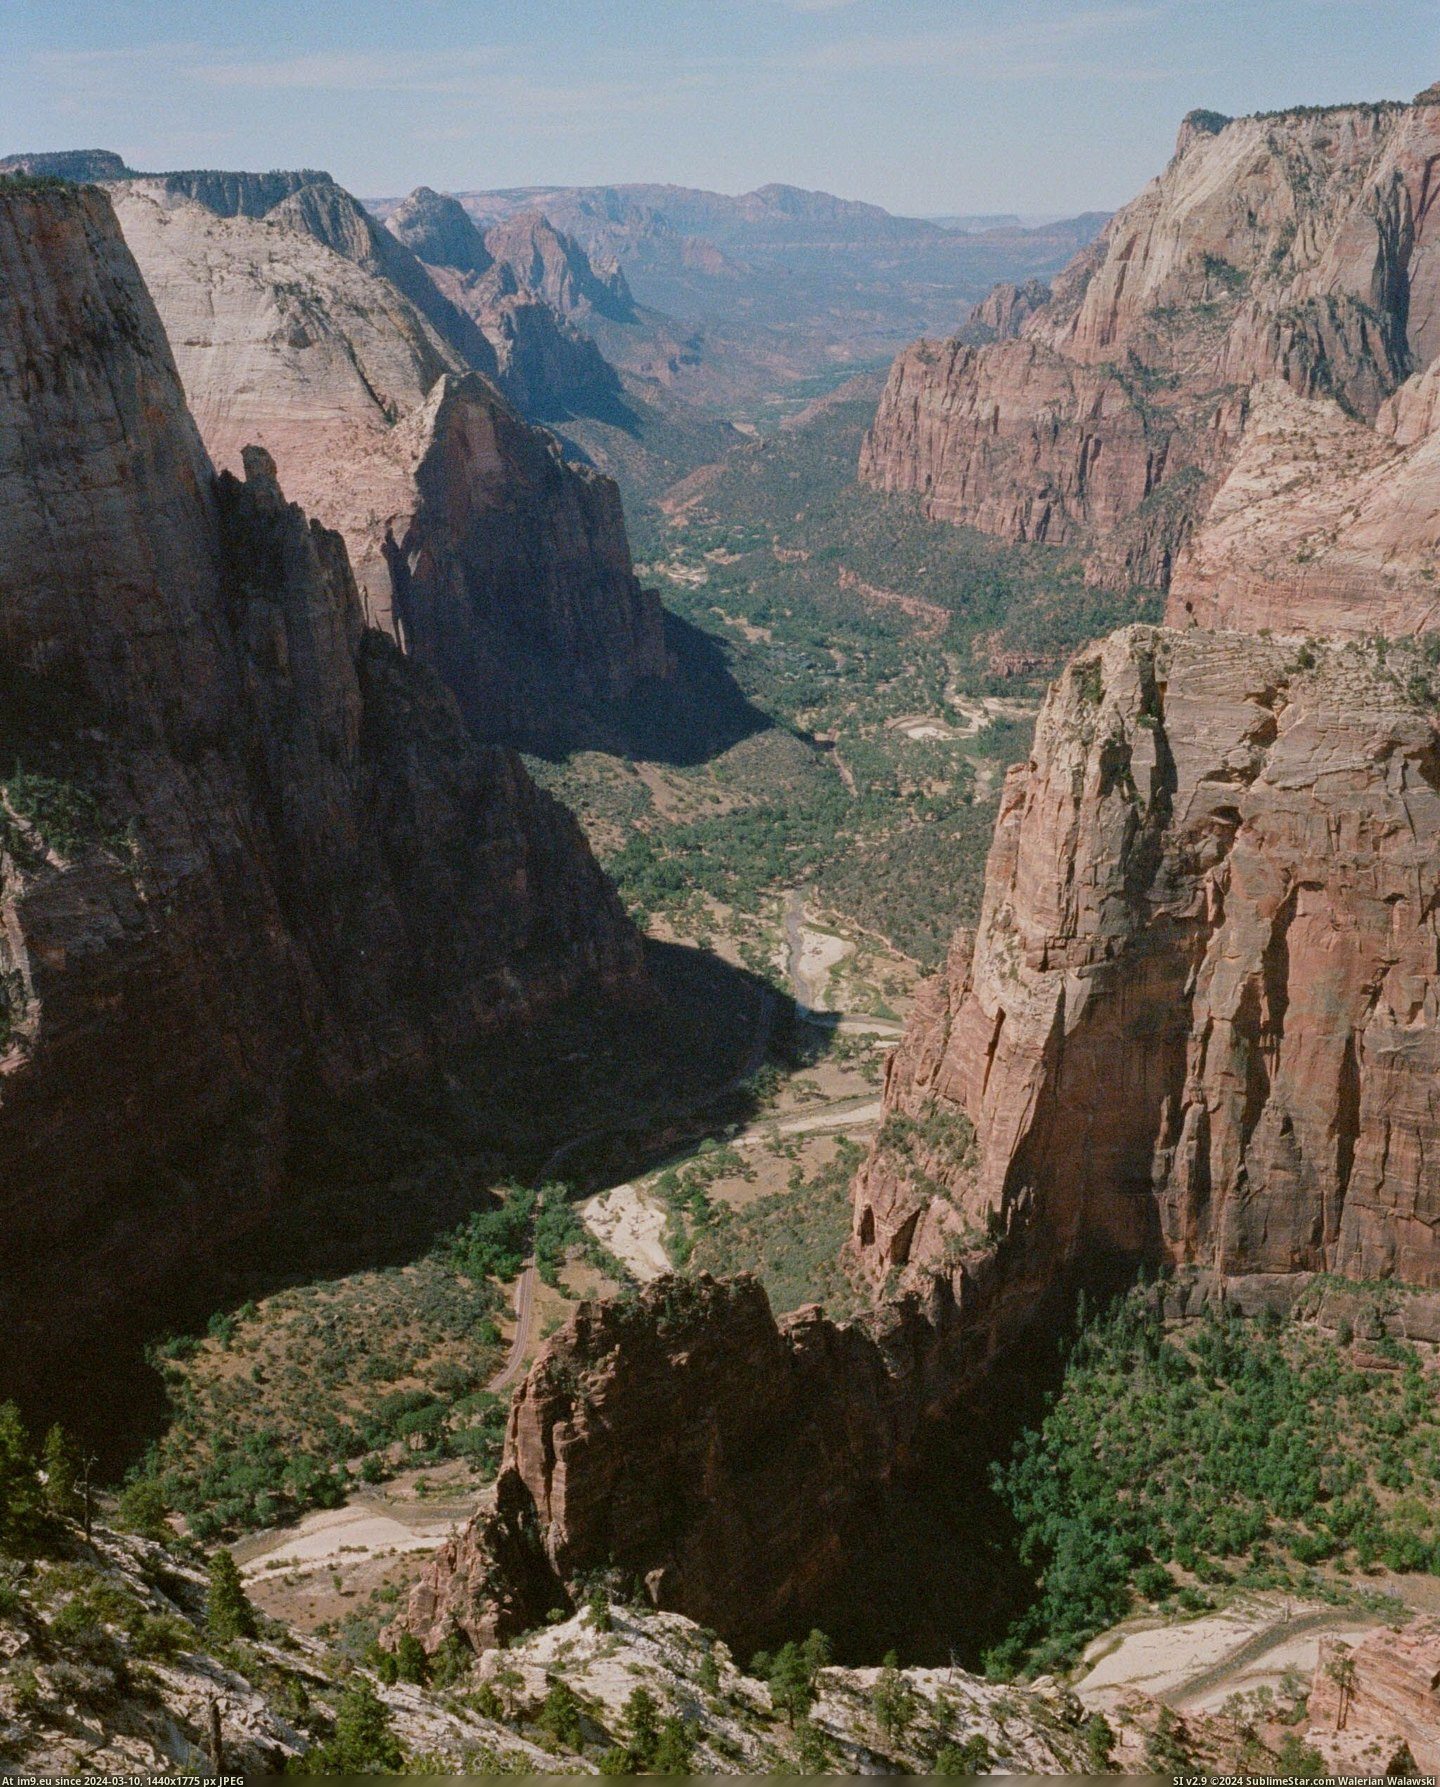 #Park #National #Point #Zion #Opinion #Overlooking #Observation #Utah #Angels #Landing [Earthporn] The best view in Zion in my opinion. From Observation Point, overlooking Angels Landing. Zion National Park, Utah. [ Pic. (Image of album My r/EARTHPORN favs))